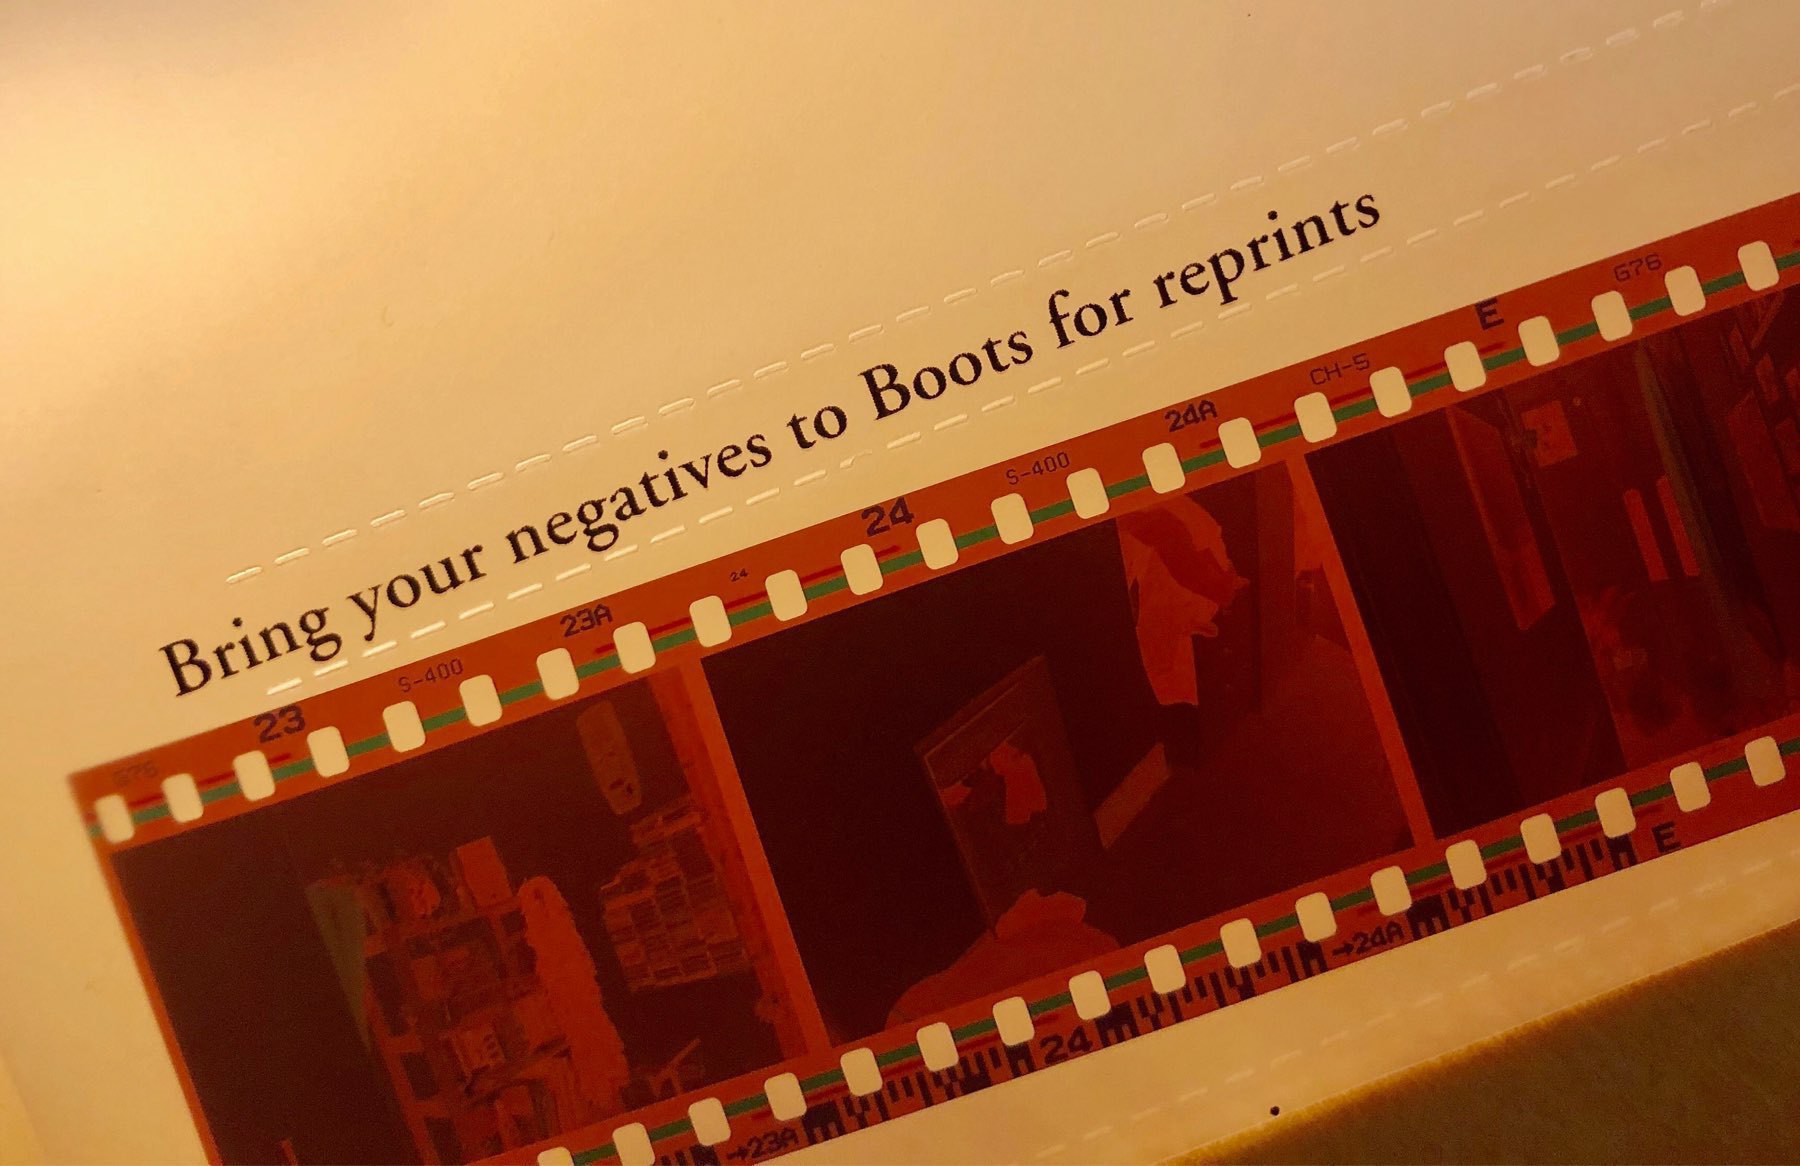 A negative packet, with promos for Boots' reprints service